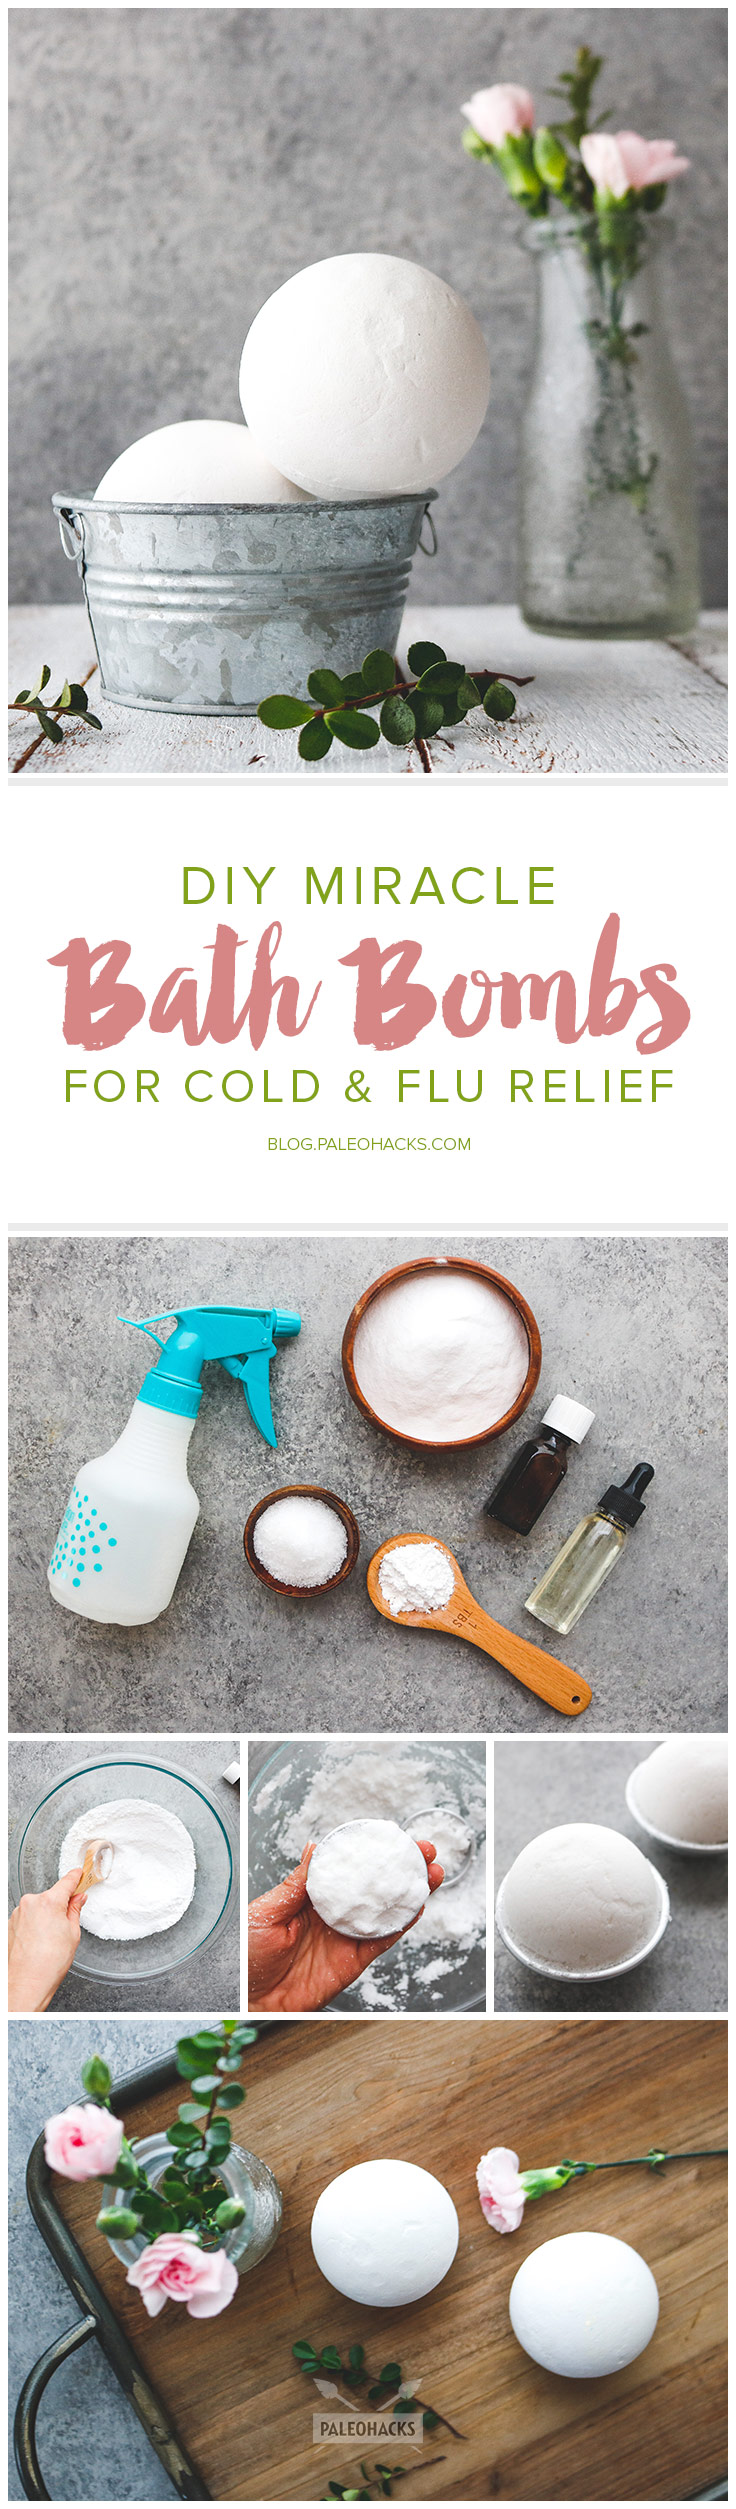 Soak away nasty flu and cold symptoms with a simple bath bomb recipe featuring soothing essential oils. It's the aromatherapy you need to survive the winter!